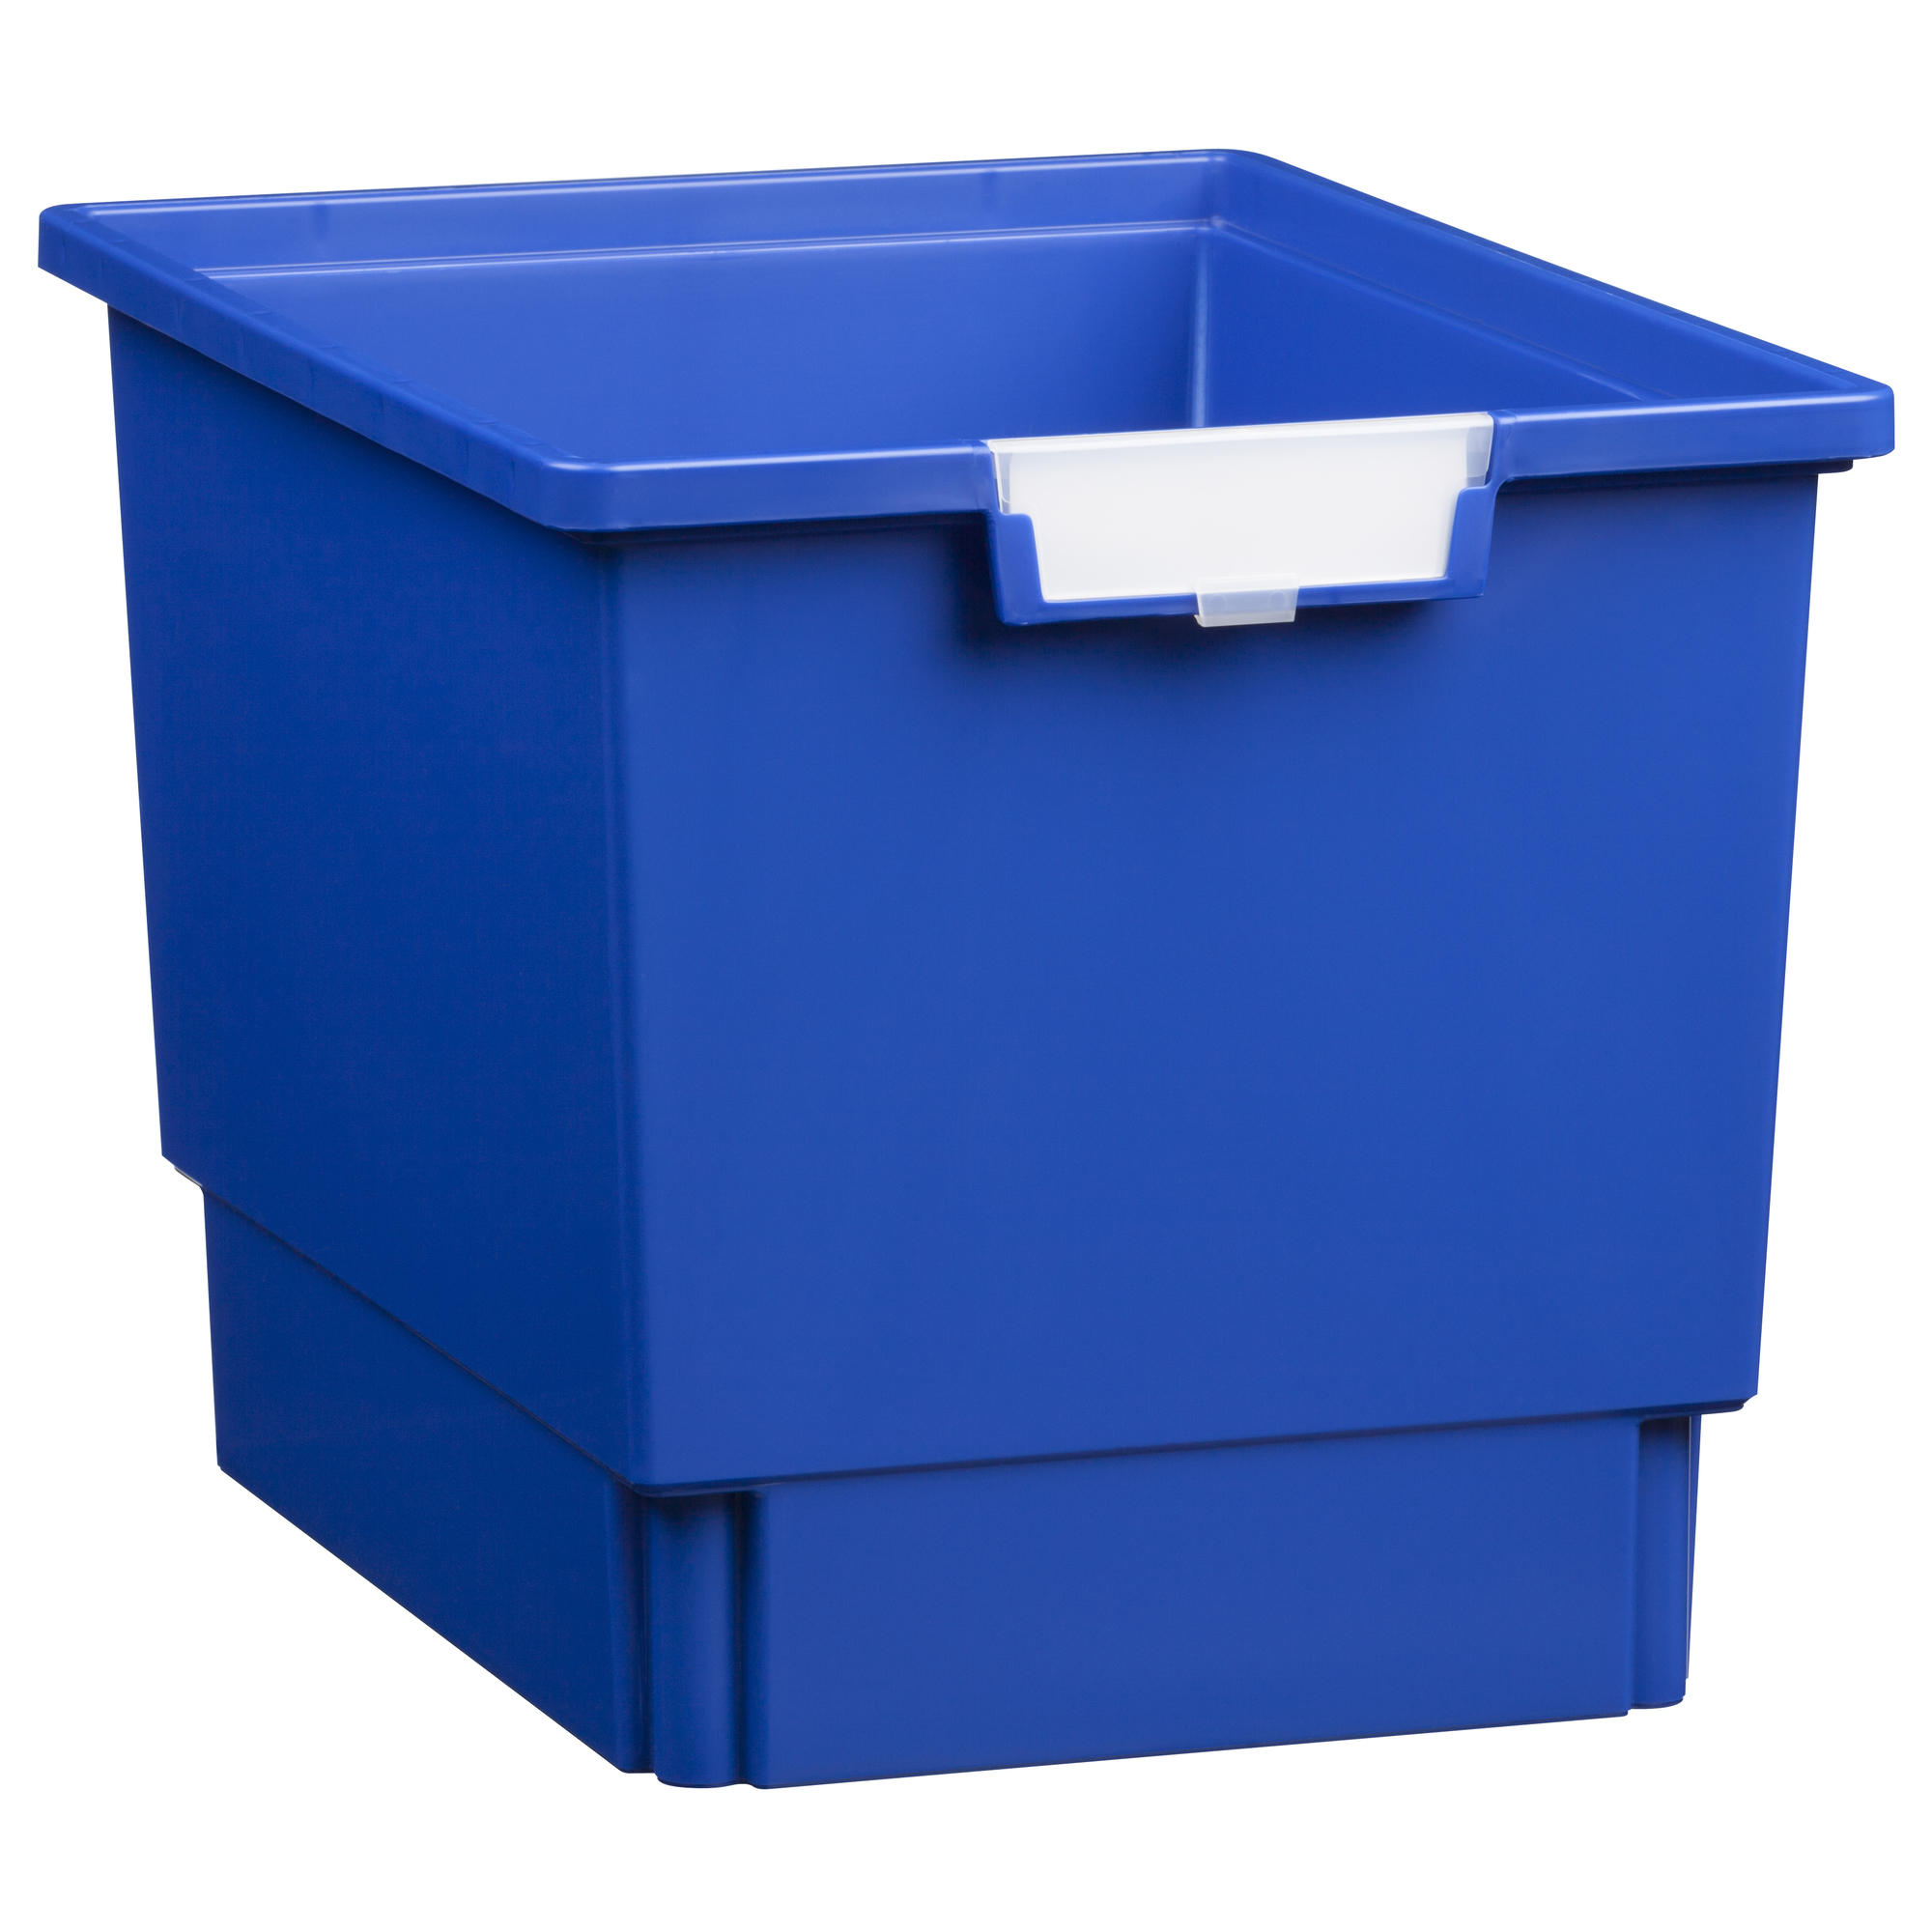 Certwood StorWerks, Slim Line 12Inch Tray in Primary Blue-3PK, Included (qty.) 3 Height 12 in, Model CE1954PB3